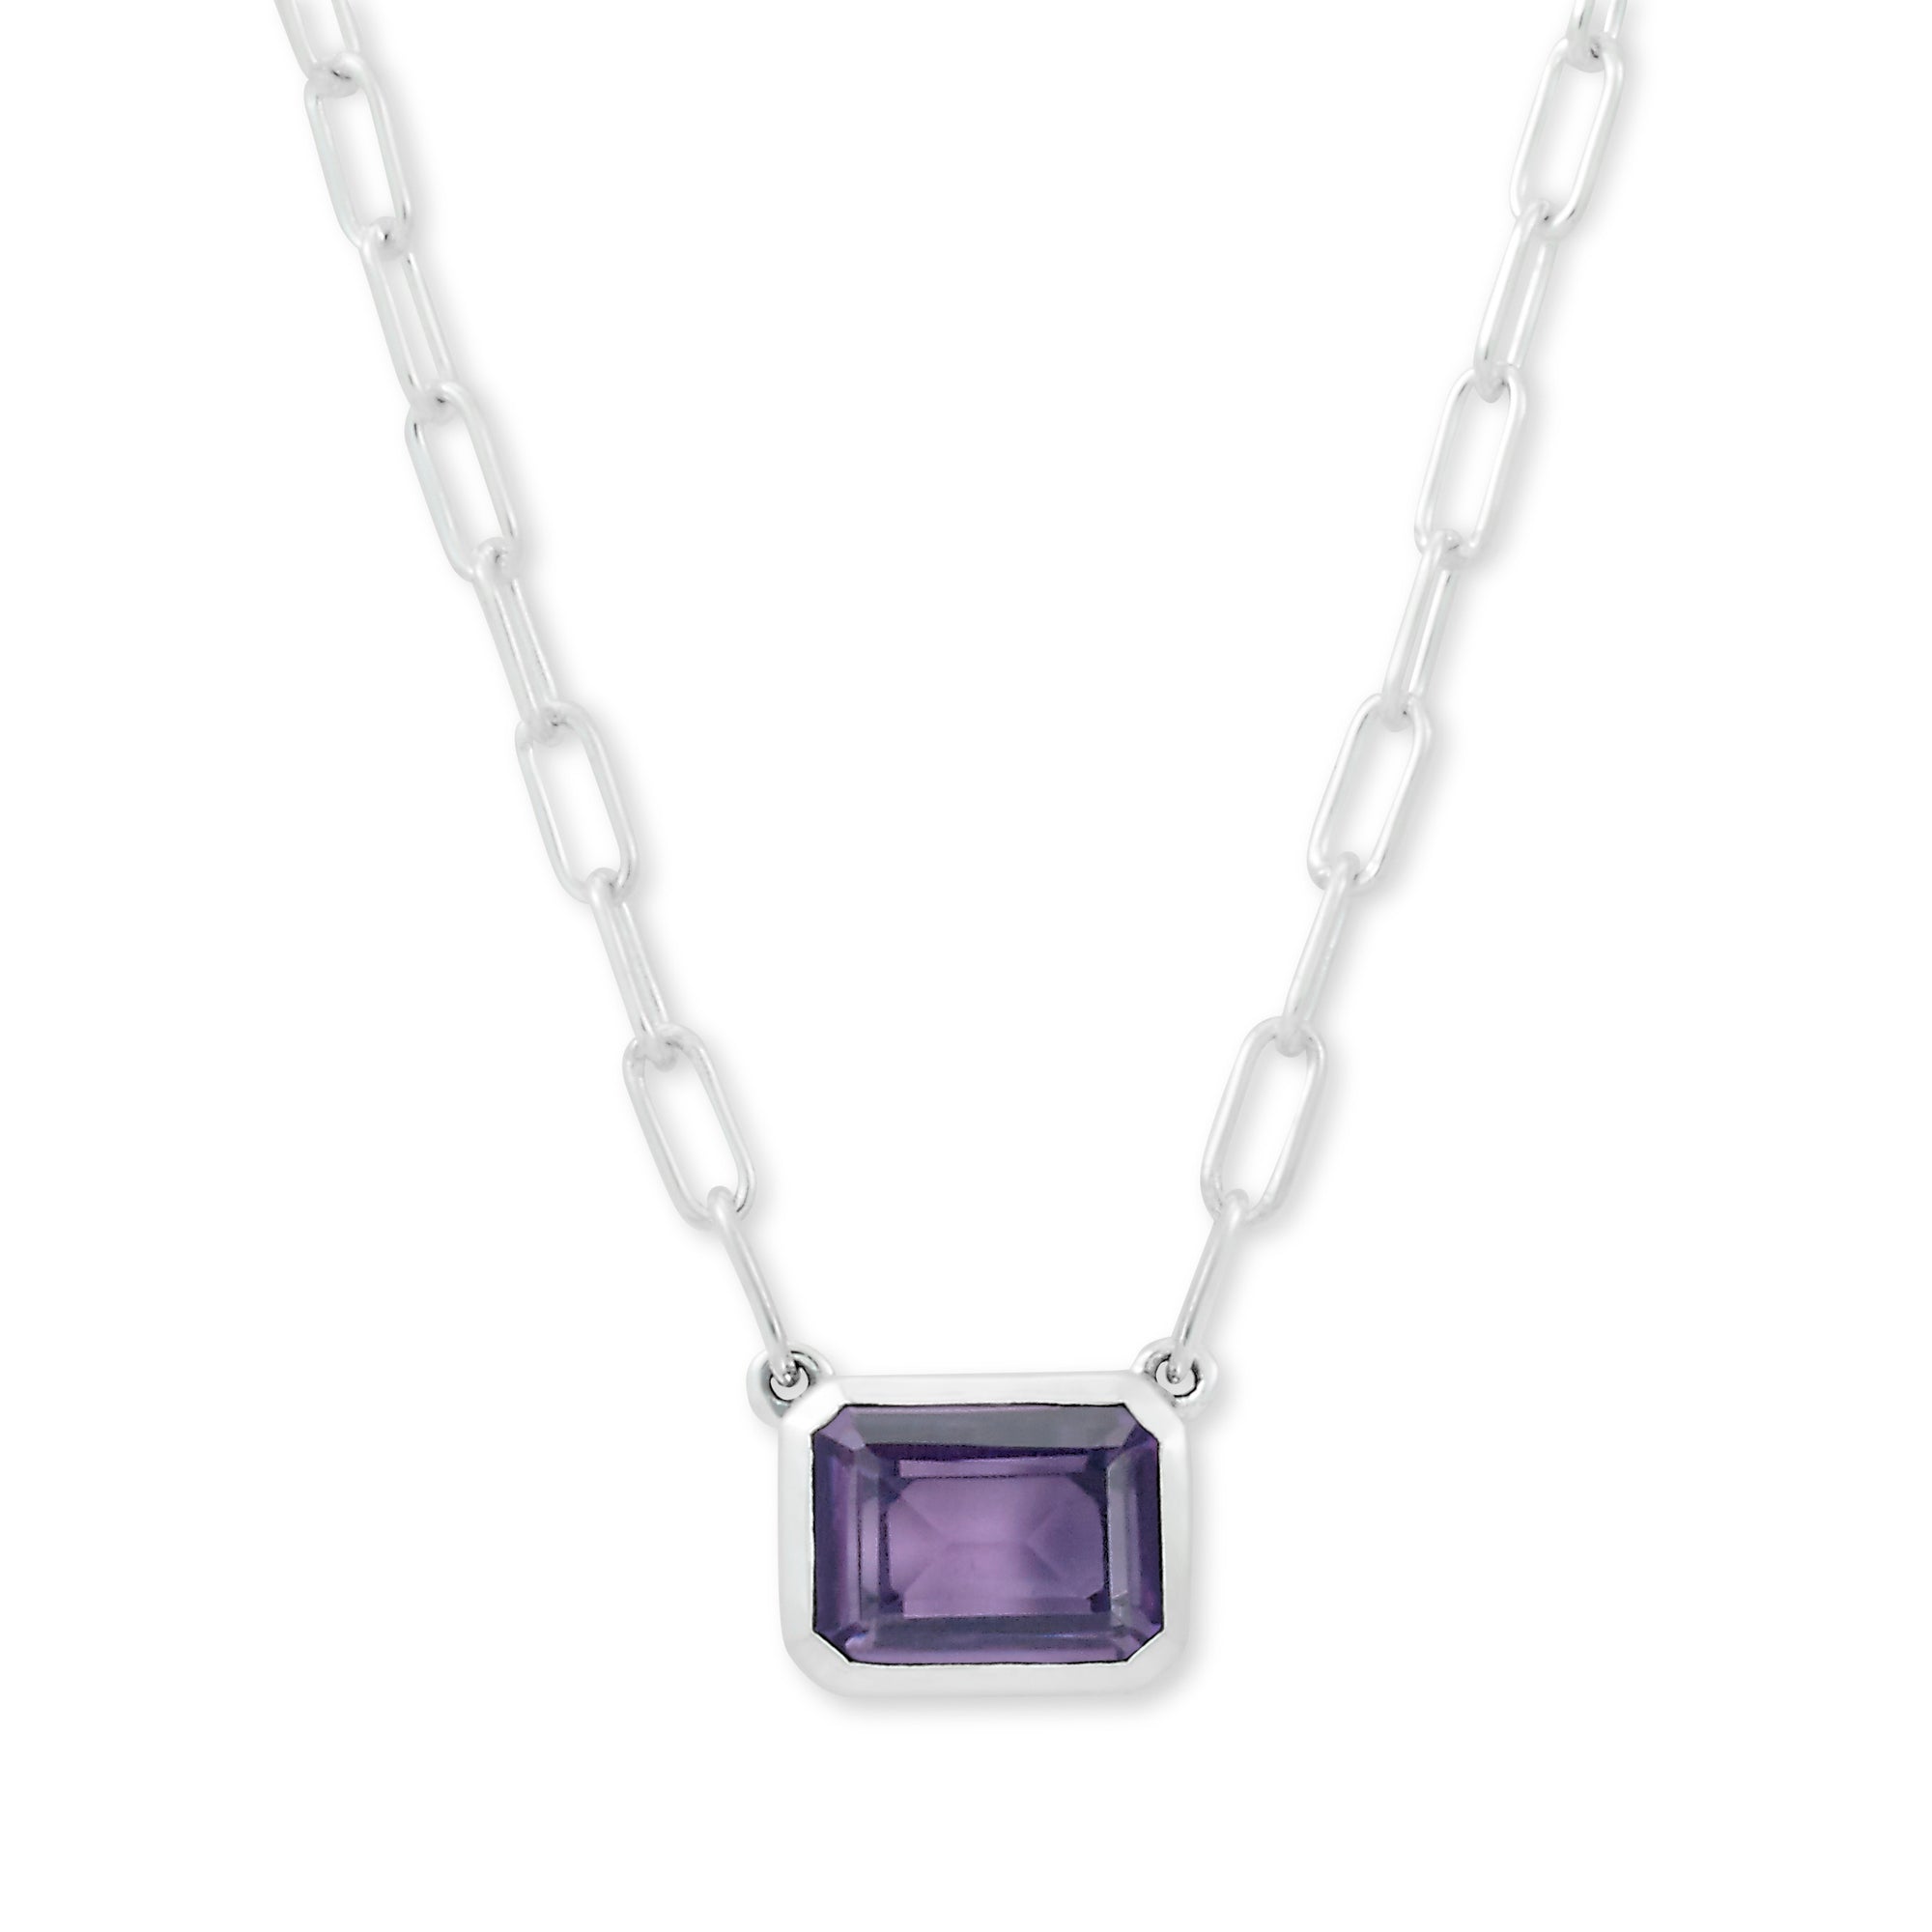 Amethyst Eirini Necklace available at Talisman Collection Fine Jewelers in El Dorado Hills, CA and online. Specs: Amethyst Eirini Necklace features an emerald-cut amethyst solitaire measuring 7x9mm, and is set in Sterling Silver.